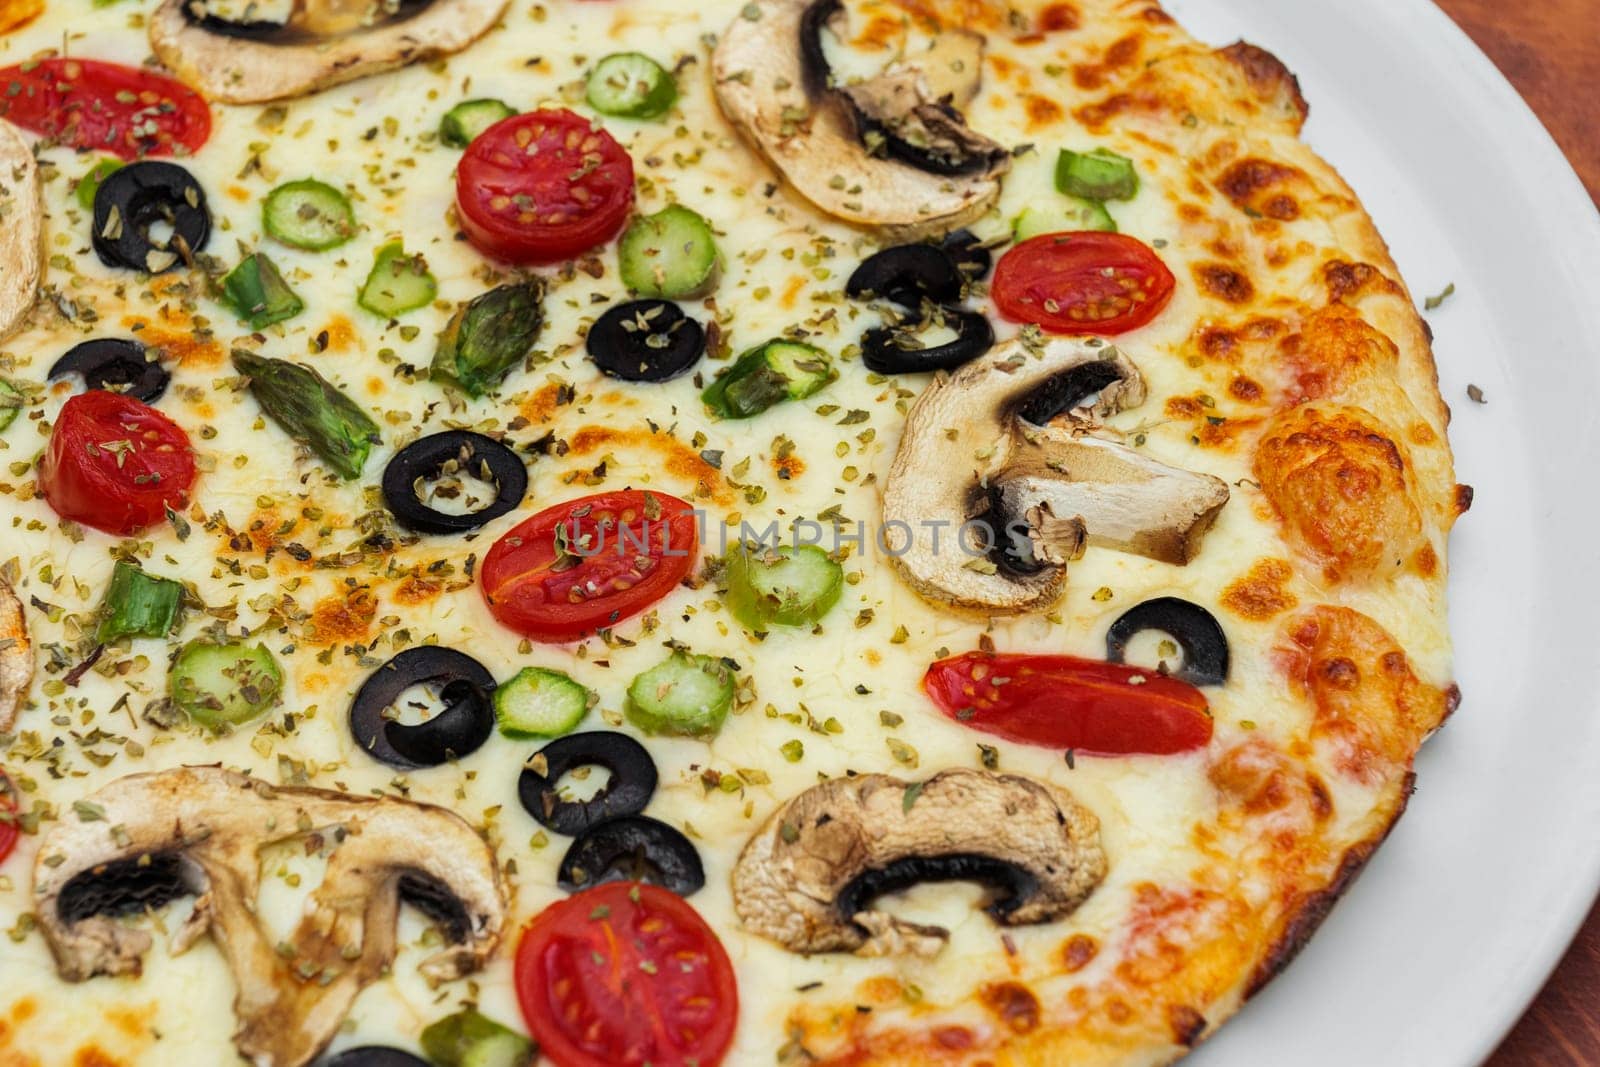 Vegetarian pizza on white plate. Mushrooms, cheese, black olives and tomatoes cherry